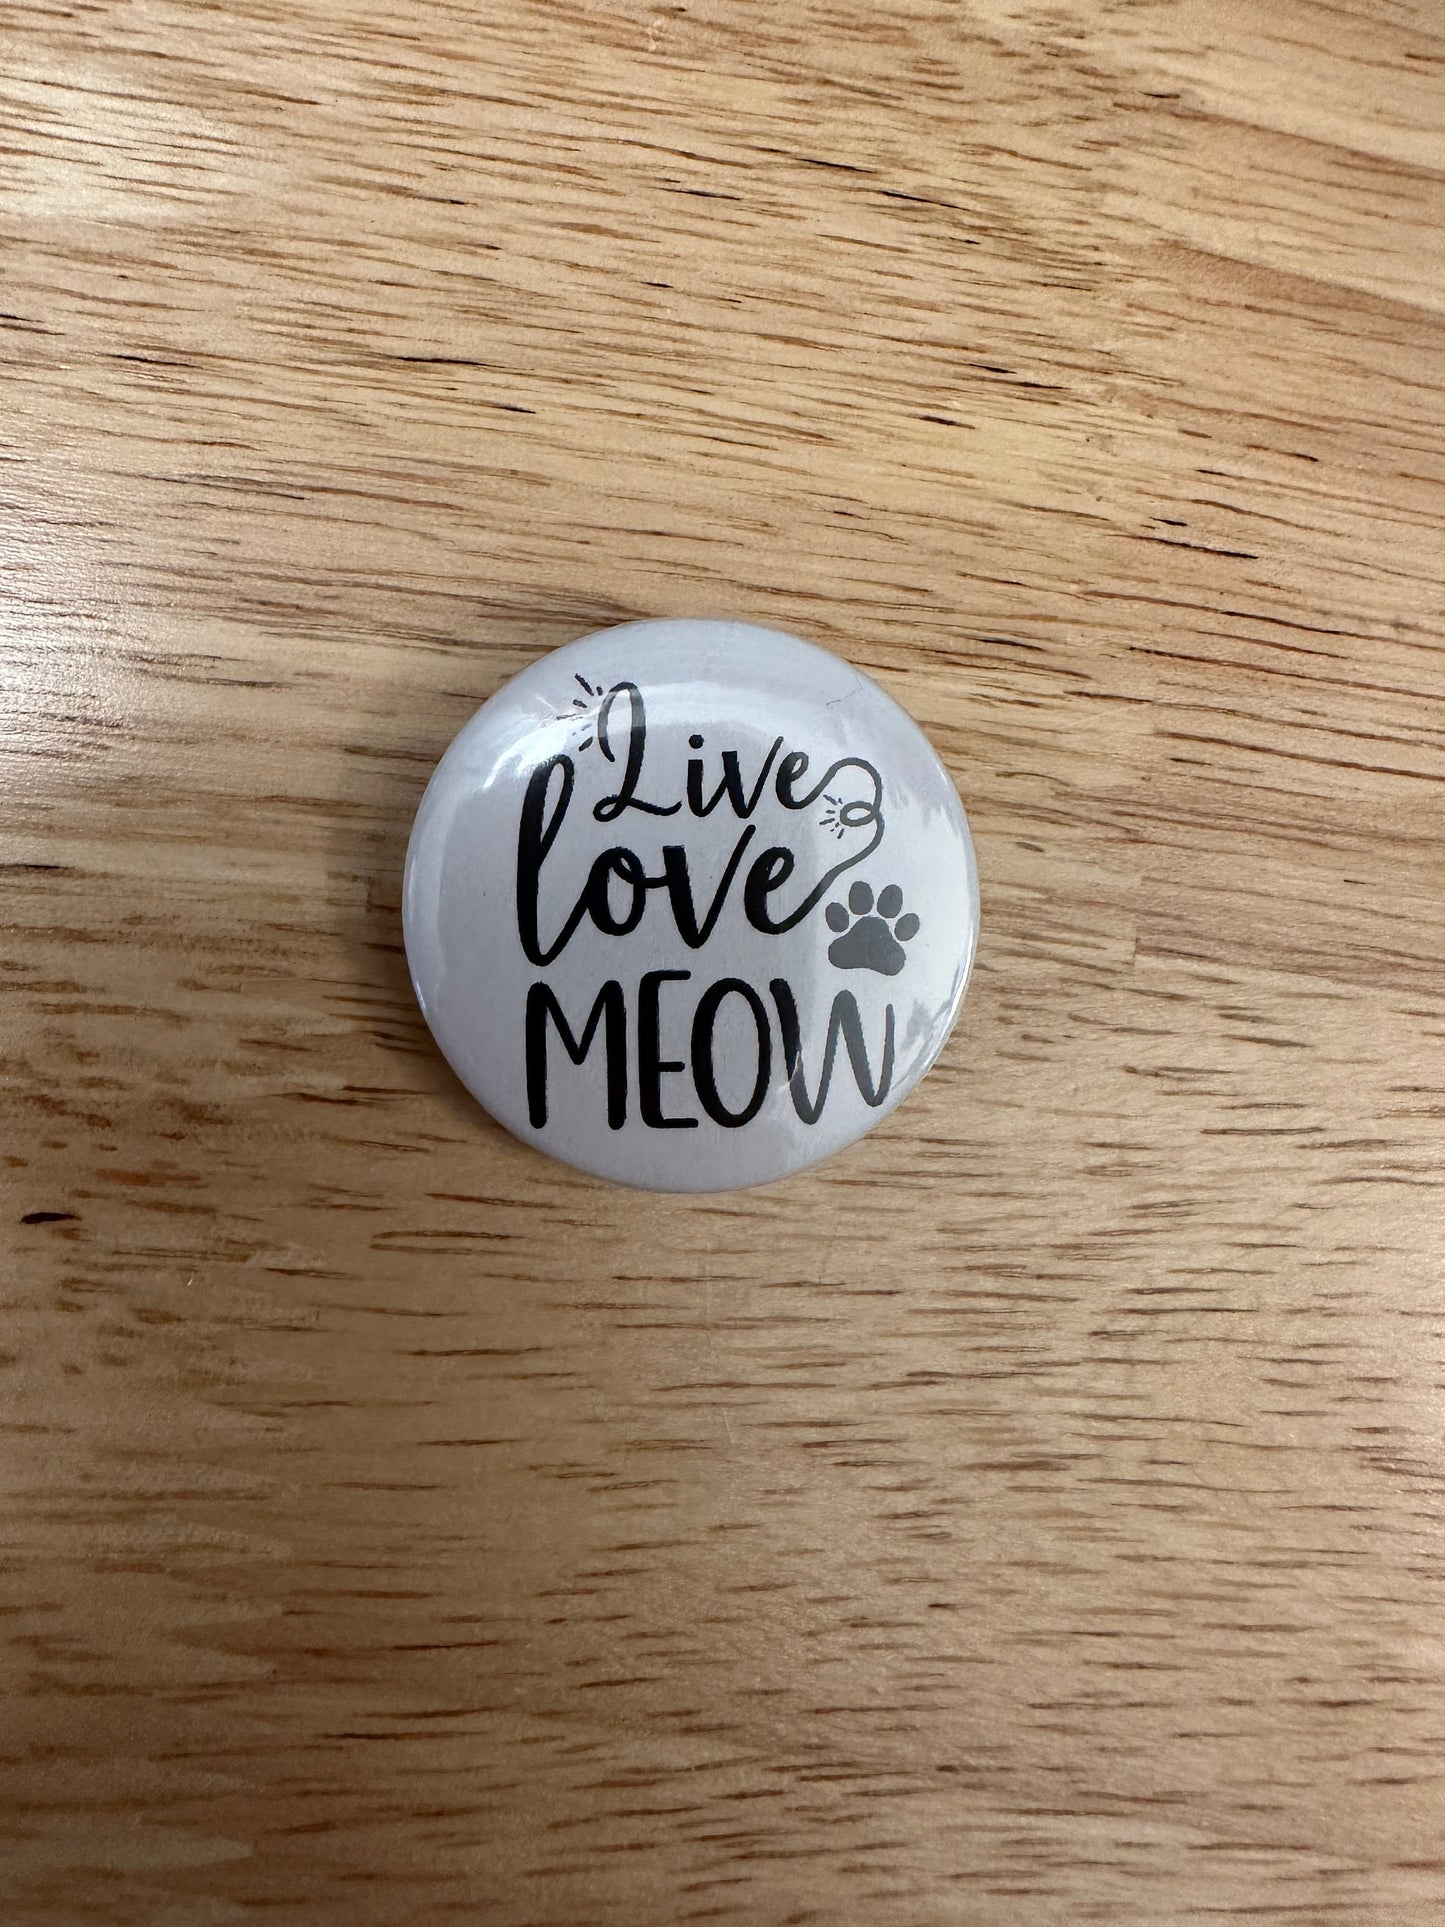 Live Love Meow 2.25" Button Pins or 1.25" Button options, Back Pack Decoration, Cat Pin, Cat designed pinback